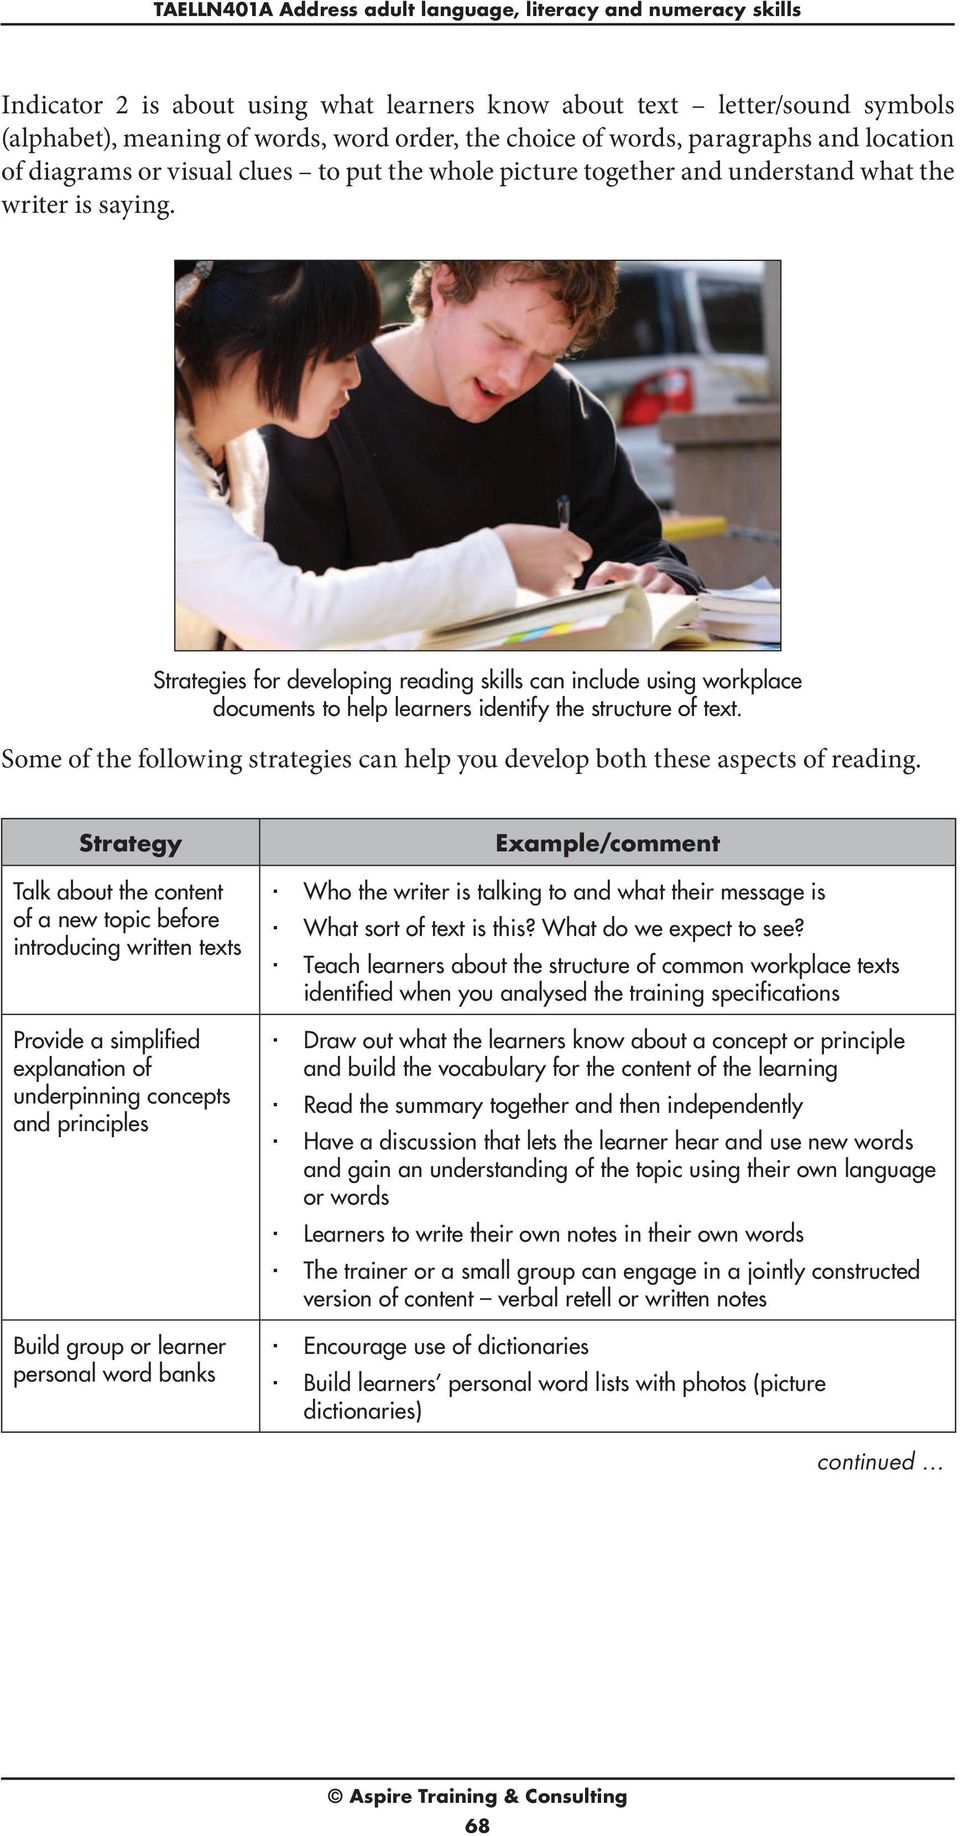 Strategies for developing reading skills can include using workplace documents to help learners identify the structure of text.